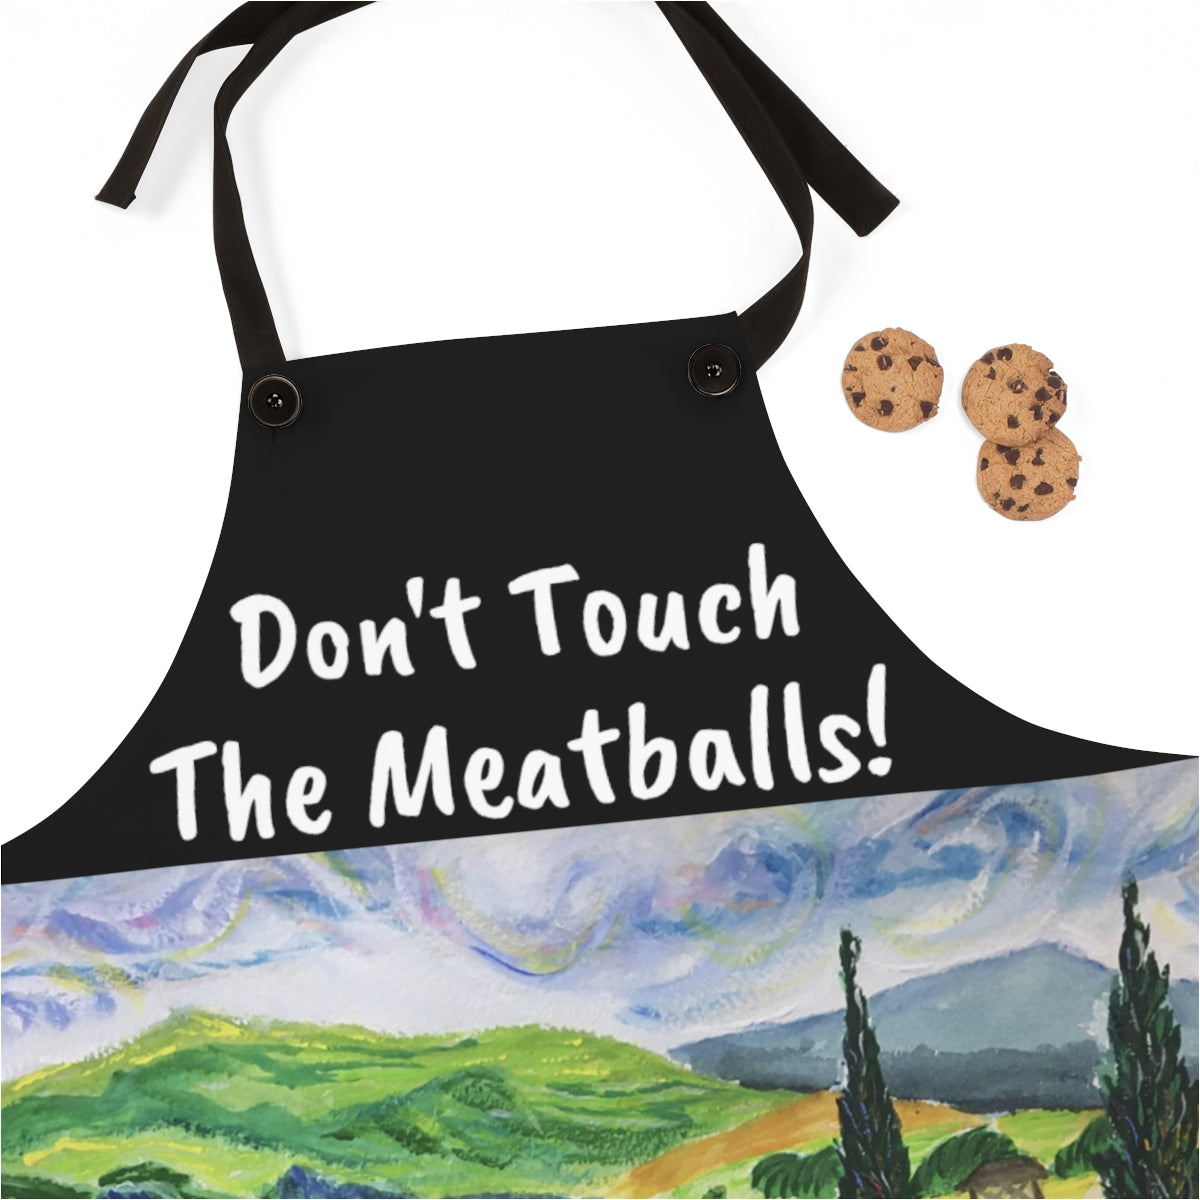 Don't Touch the Meatballs!  Funny Saying on a Black Apron with Tuscany